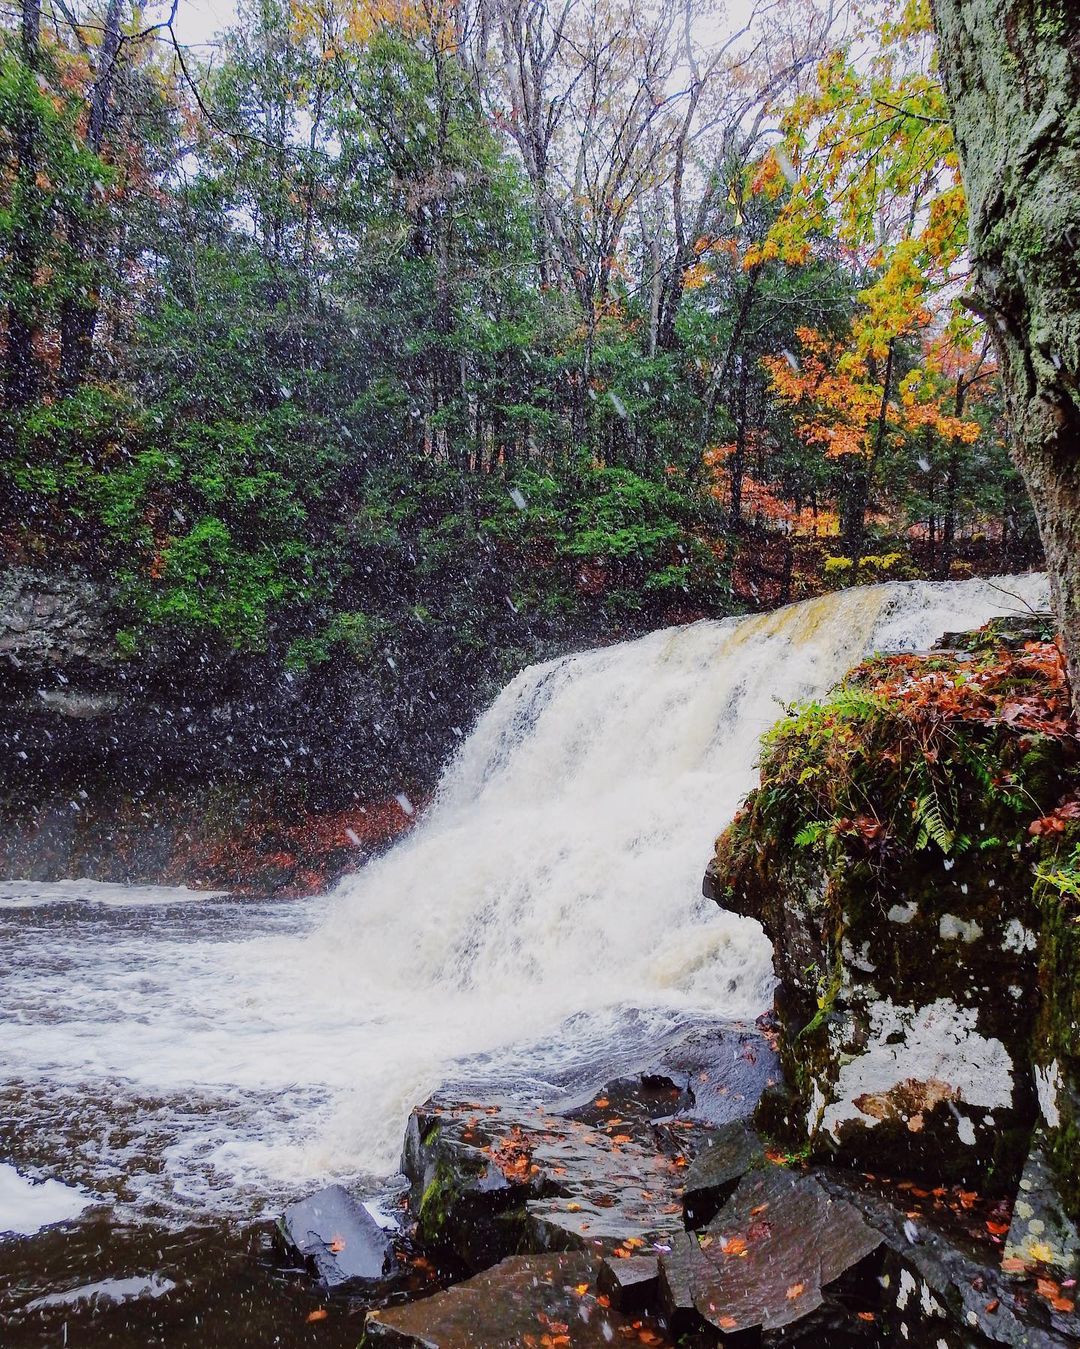 Small waterfall during early snowfall in the autumn at Wadsworth Falls State Park. Photo by Instagram user @alexjwphotography.